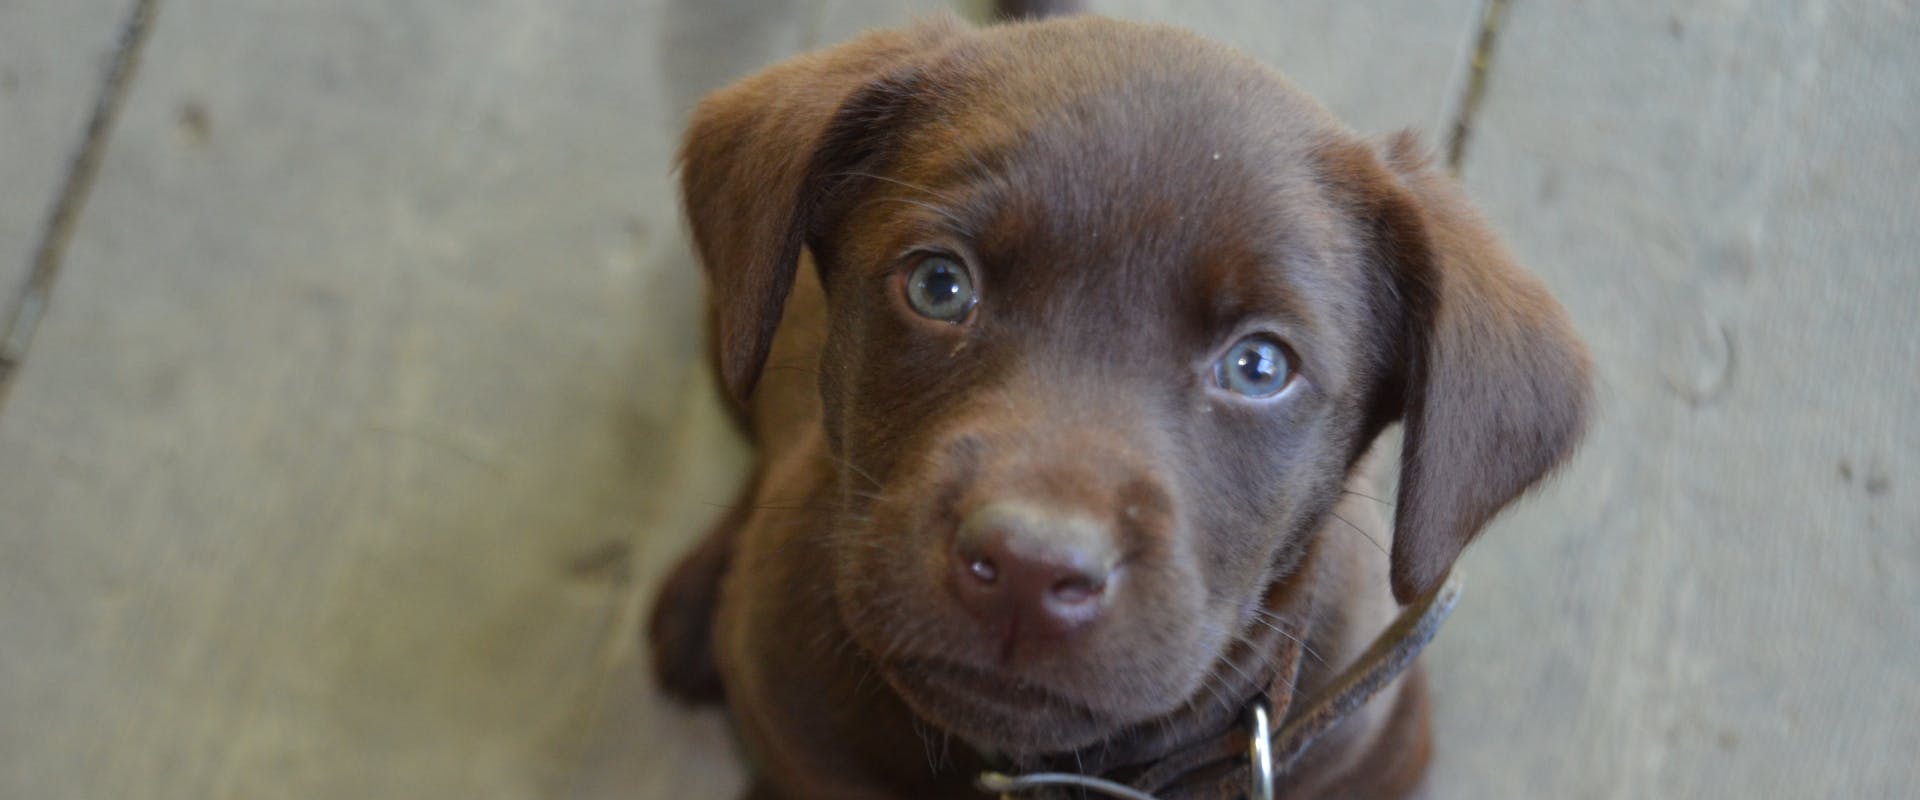 a chocolate Labrador puppy with blue eyes looking up at the camera